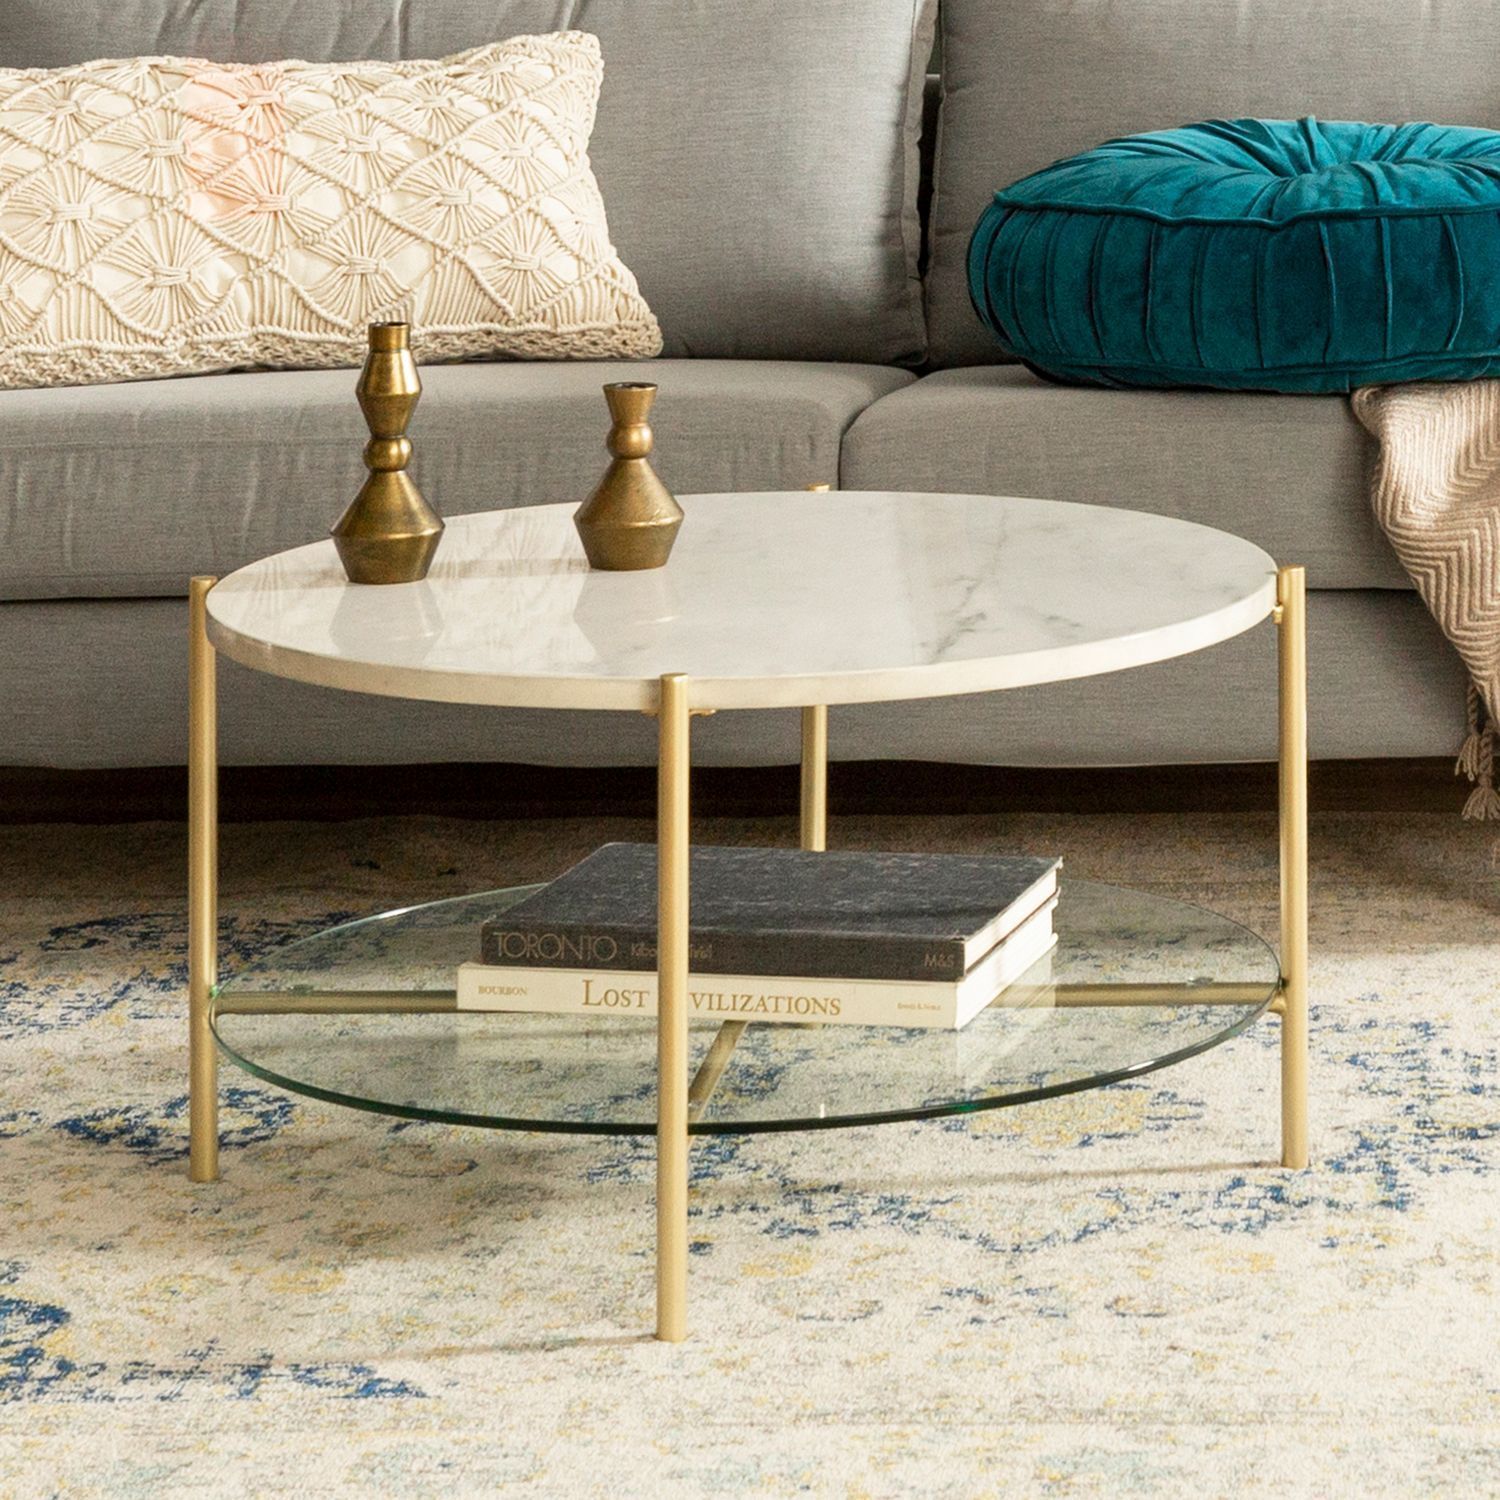 Round White Faux Marble & Gold Coffee Table With Glass Shelf | Pier 1 In Modern Round Faux Marble Coffee Tables (Gallery 5 of 20)